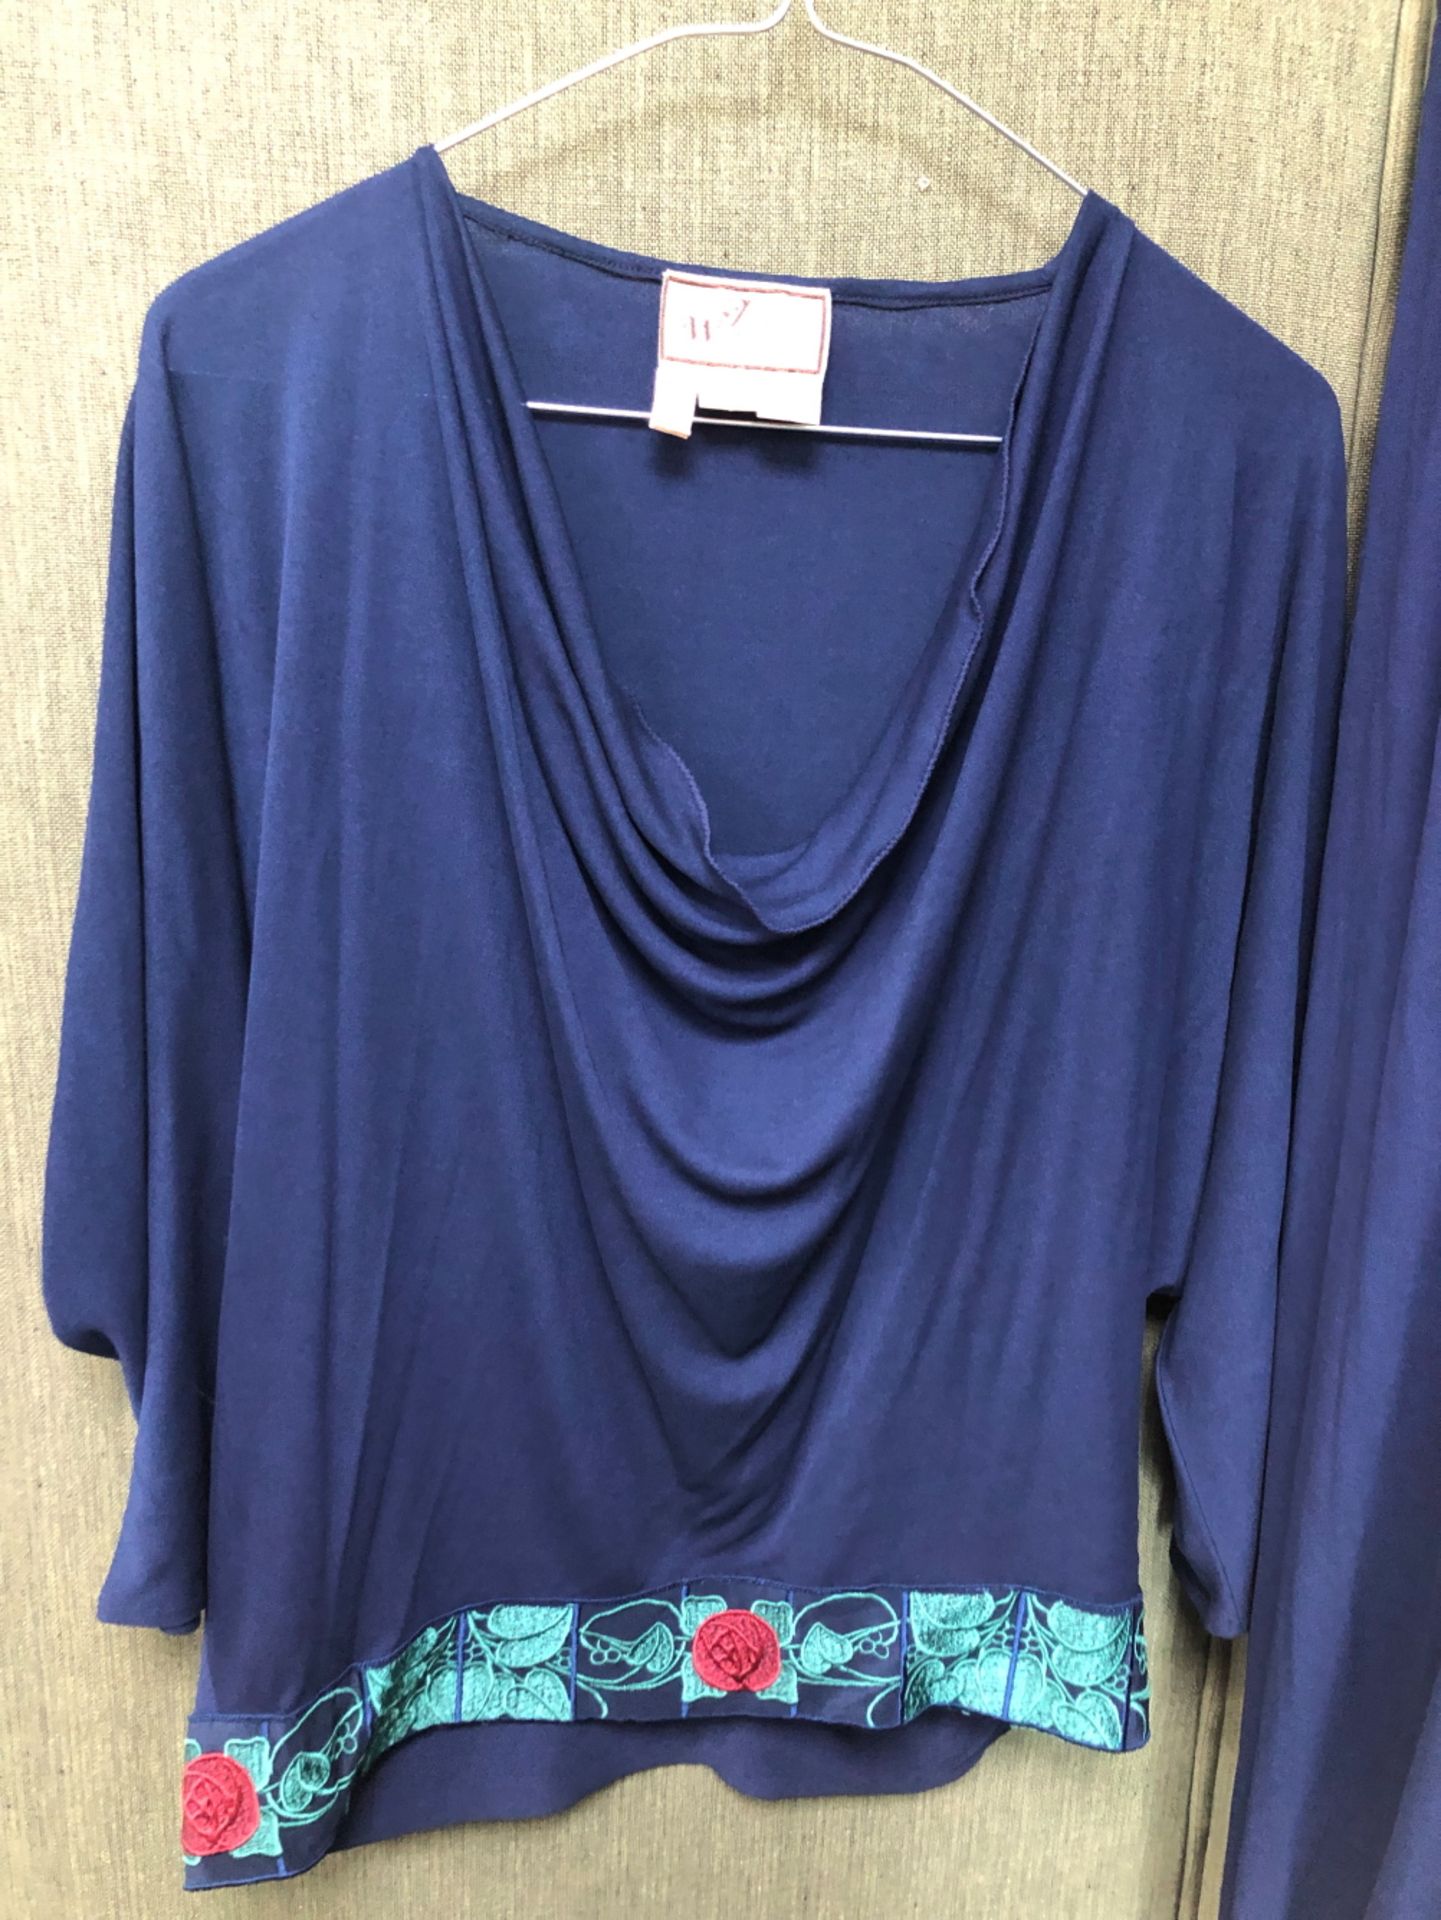 A JANICE WAINWRIGHT UK 14 NAVY AND FLORAL SHEER TUNIC TIE UP TOP WITH MATCHING 3/4 SLEEVE TOP - Bild 2 aus 11